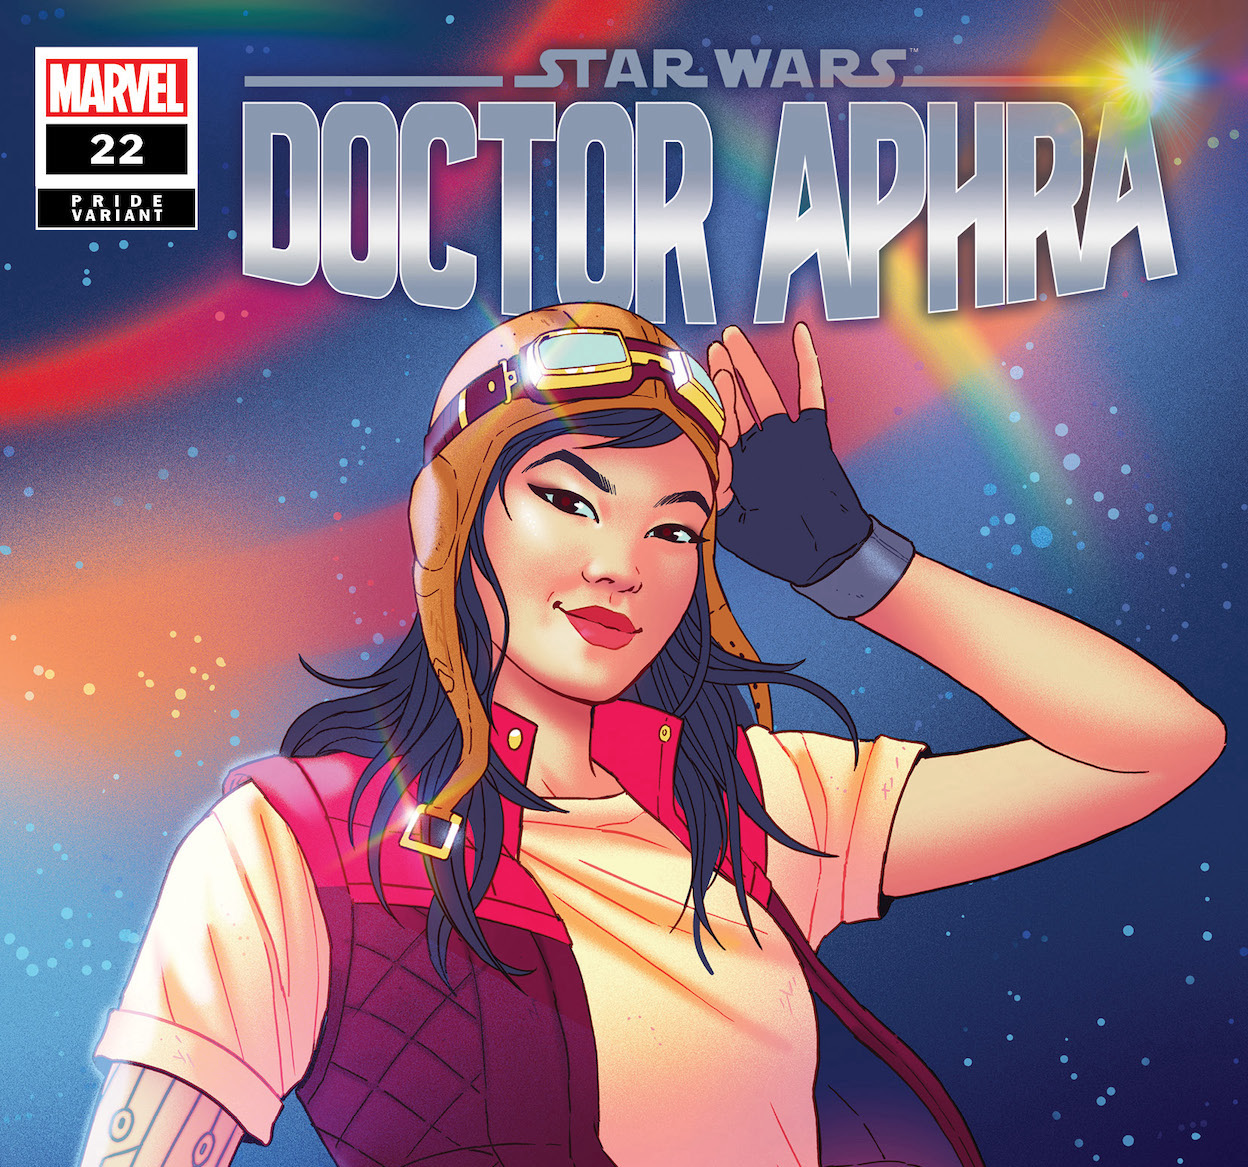 Check out Marvel's Pride Month Star Wars variant covers